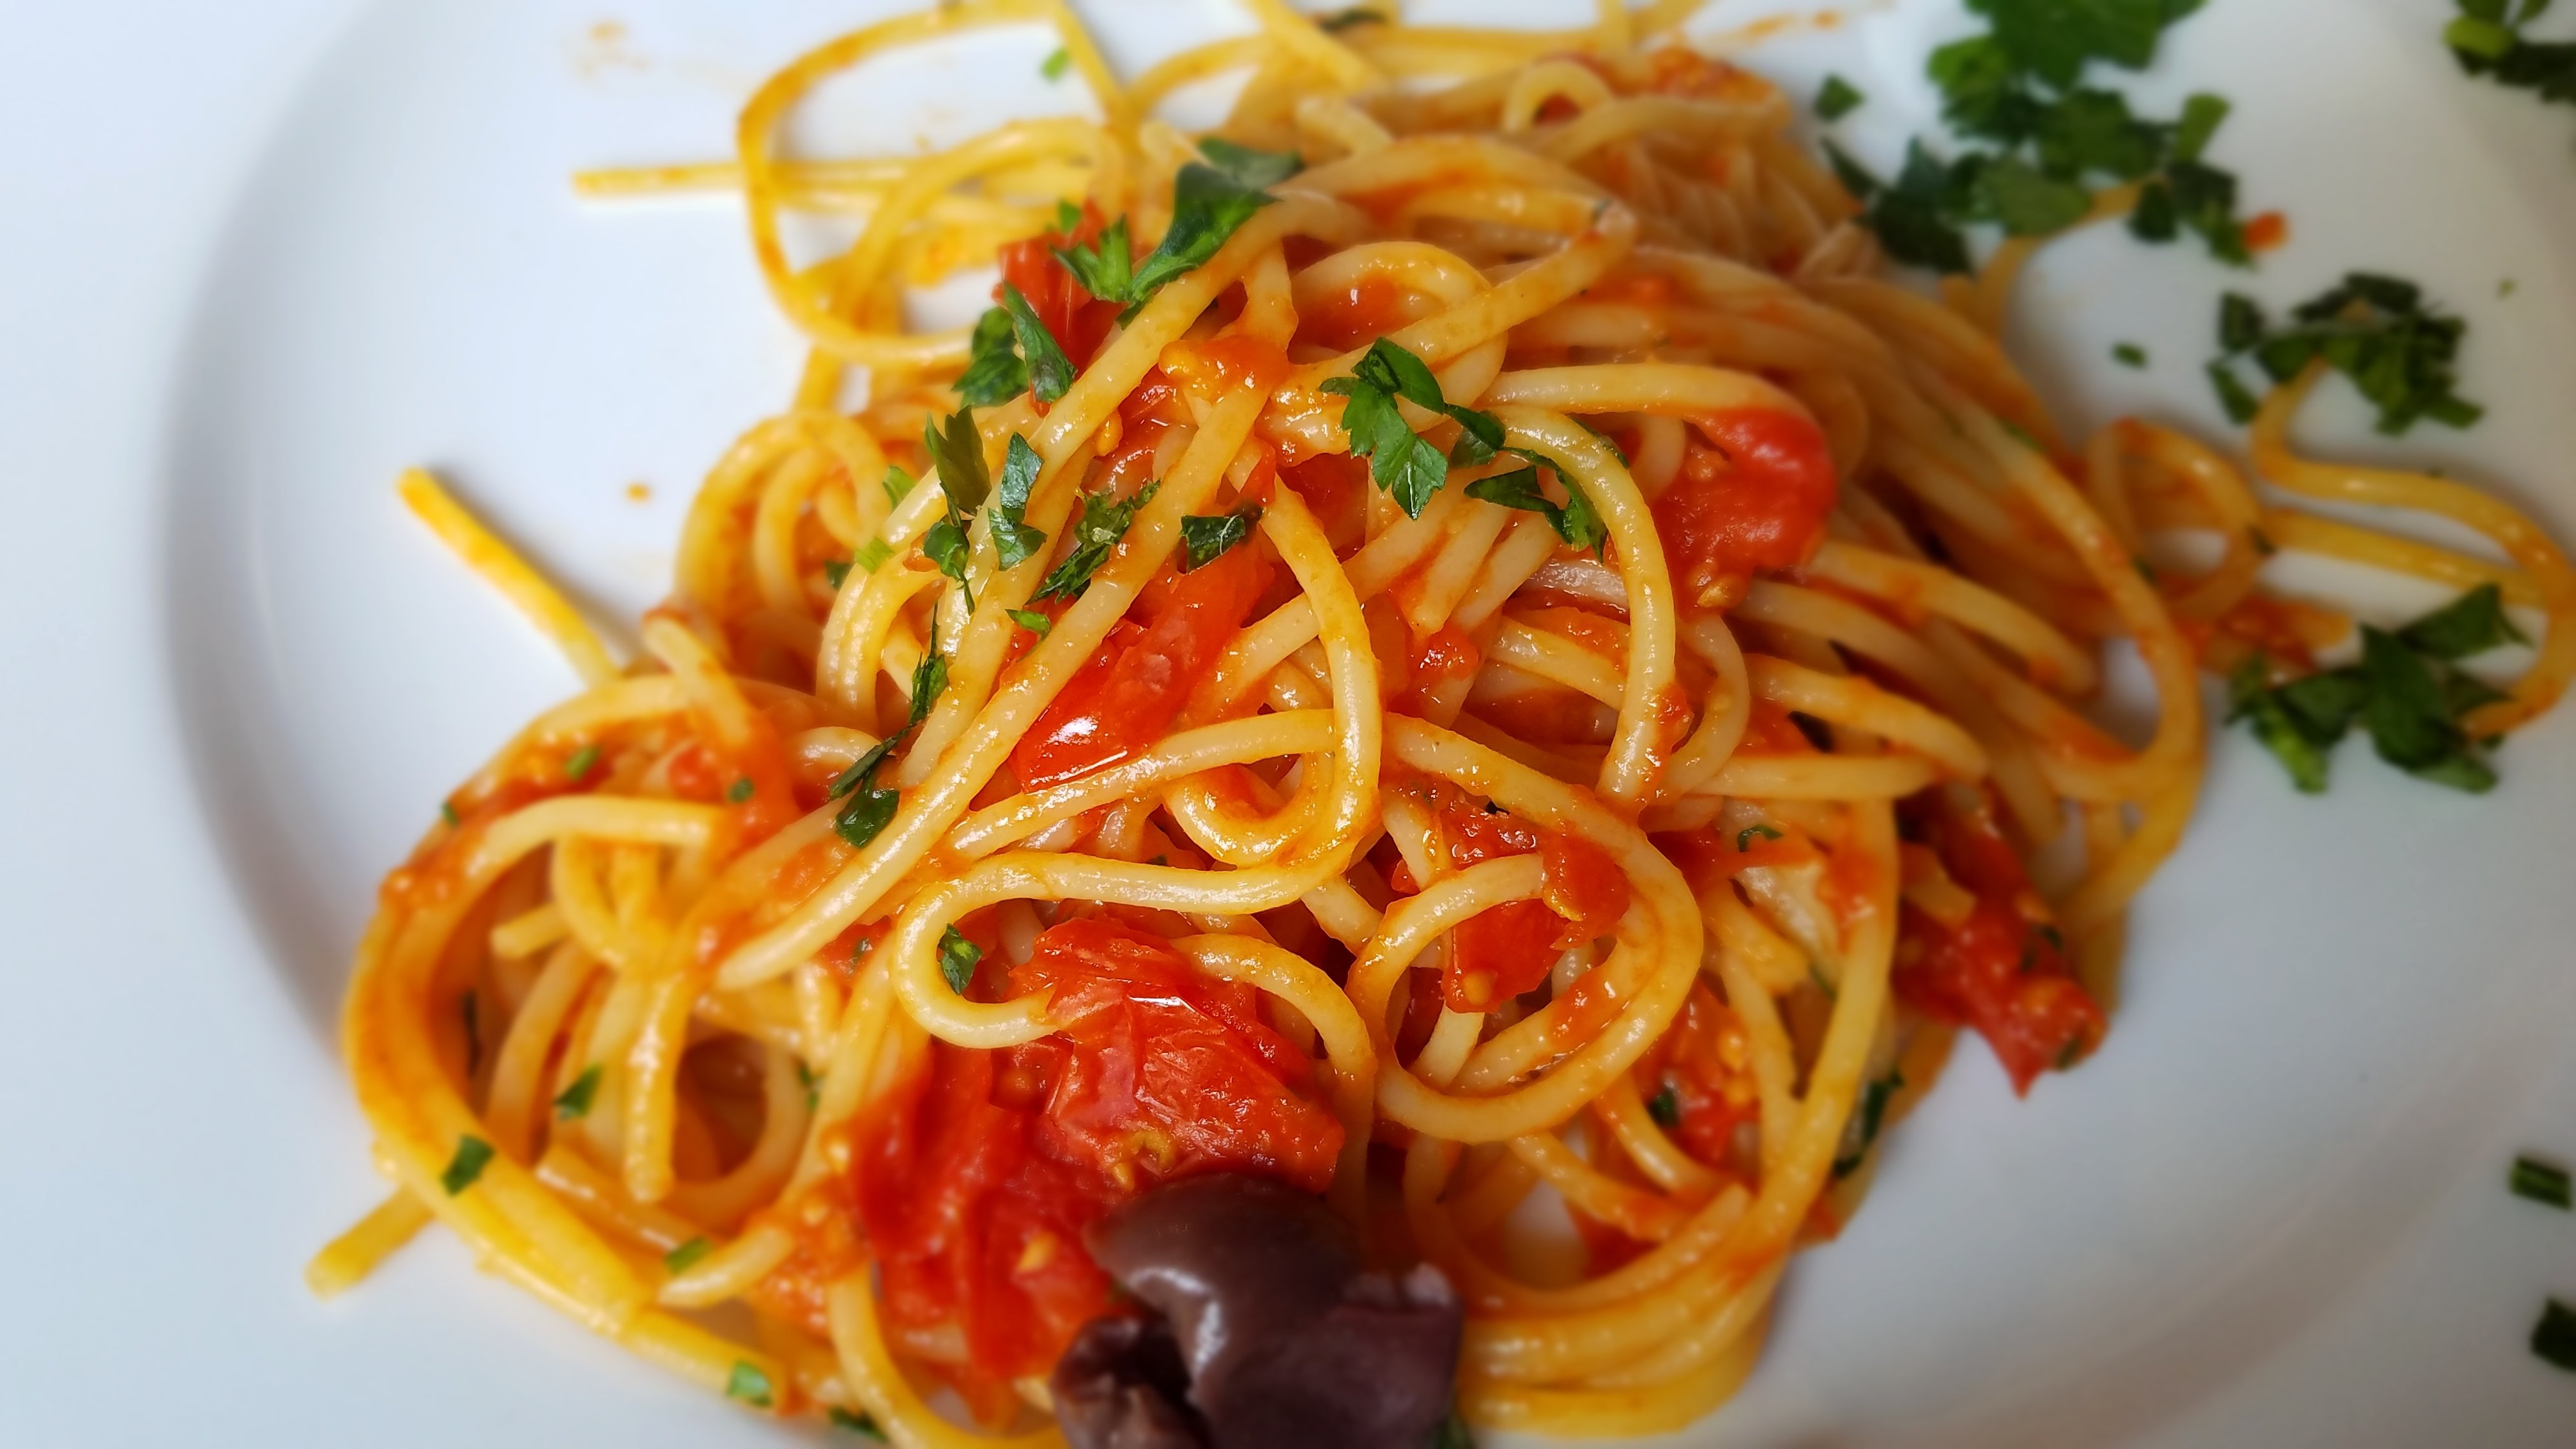 Food Tours of Naples